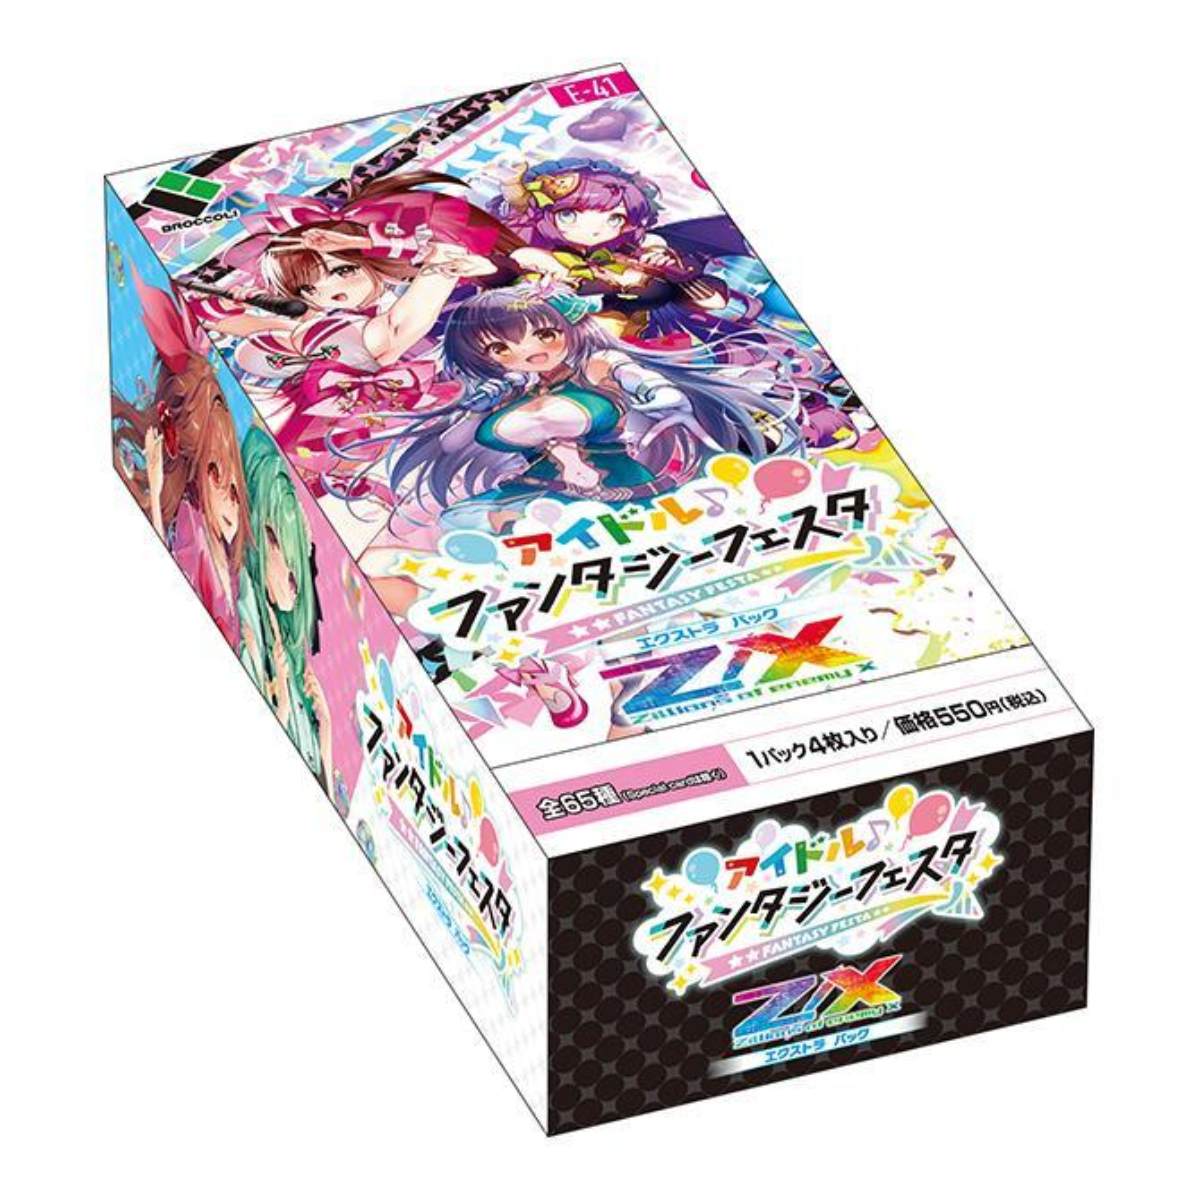 Z/X -Zillions of enemy X- Idol Fantasy Festa The Extra Pack The 41st [ZX-E-41] (Japanese)-EX Pack (Random)-Broccoli-Ace Cards & Collectibles